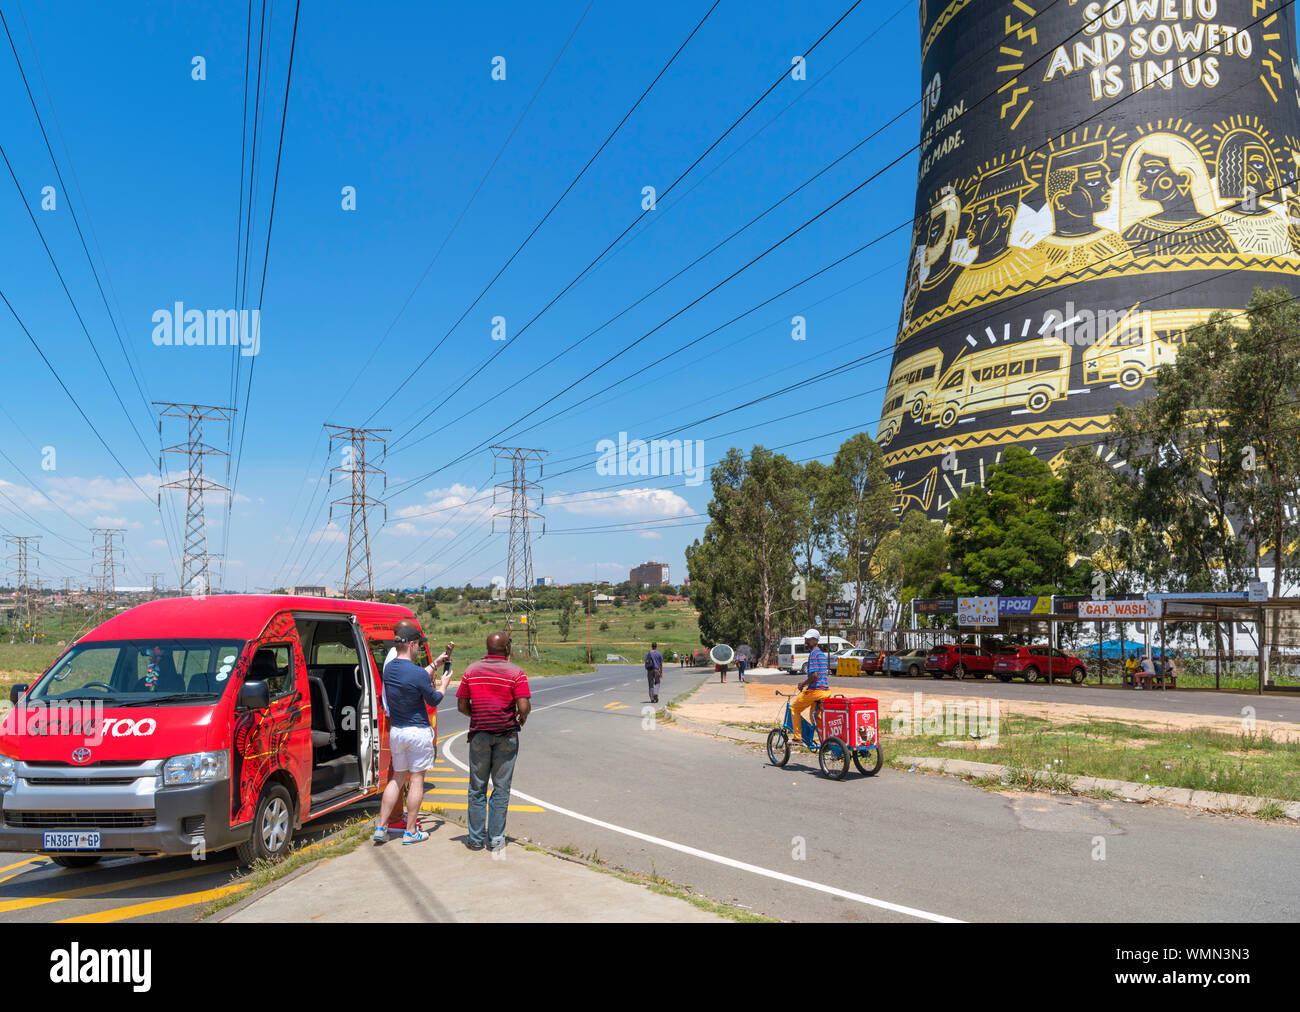 City Sightseeing Soweto tour minibus in front of the Orlando Towers, Soweto, Johannesburg, South Africa Stock Photo